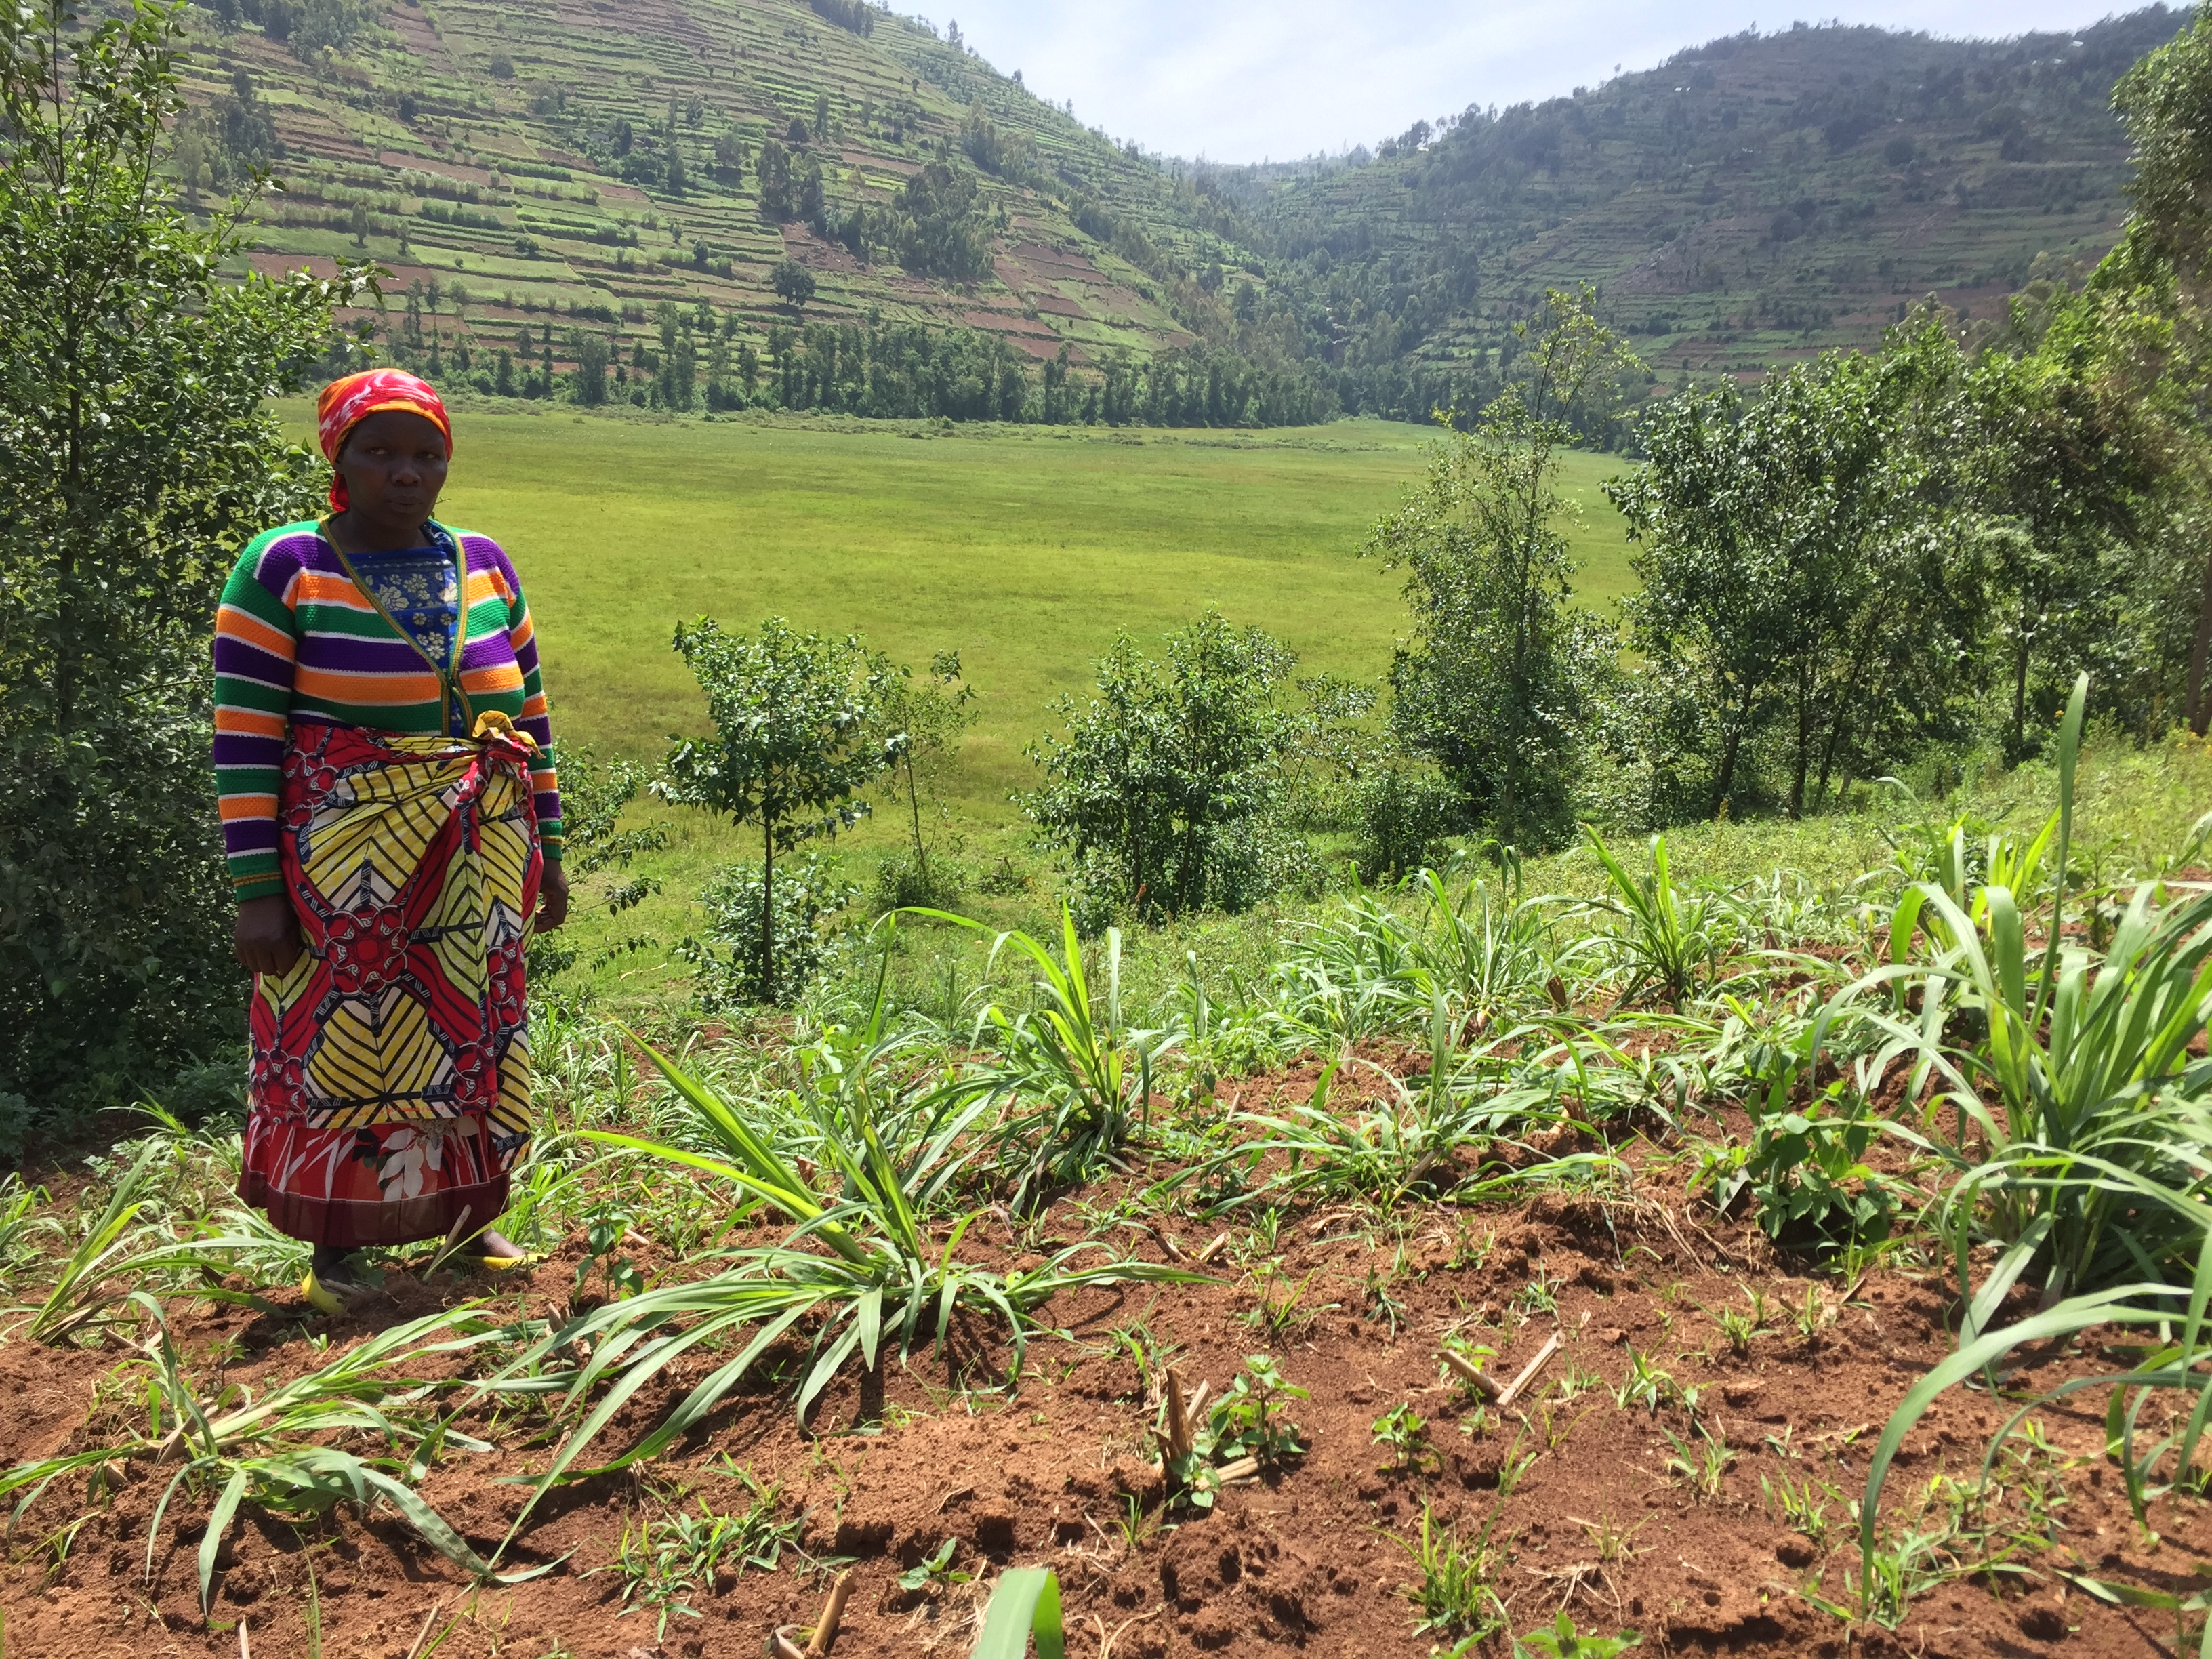 A woman stands in a planted field